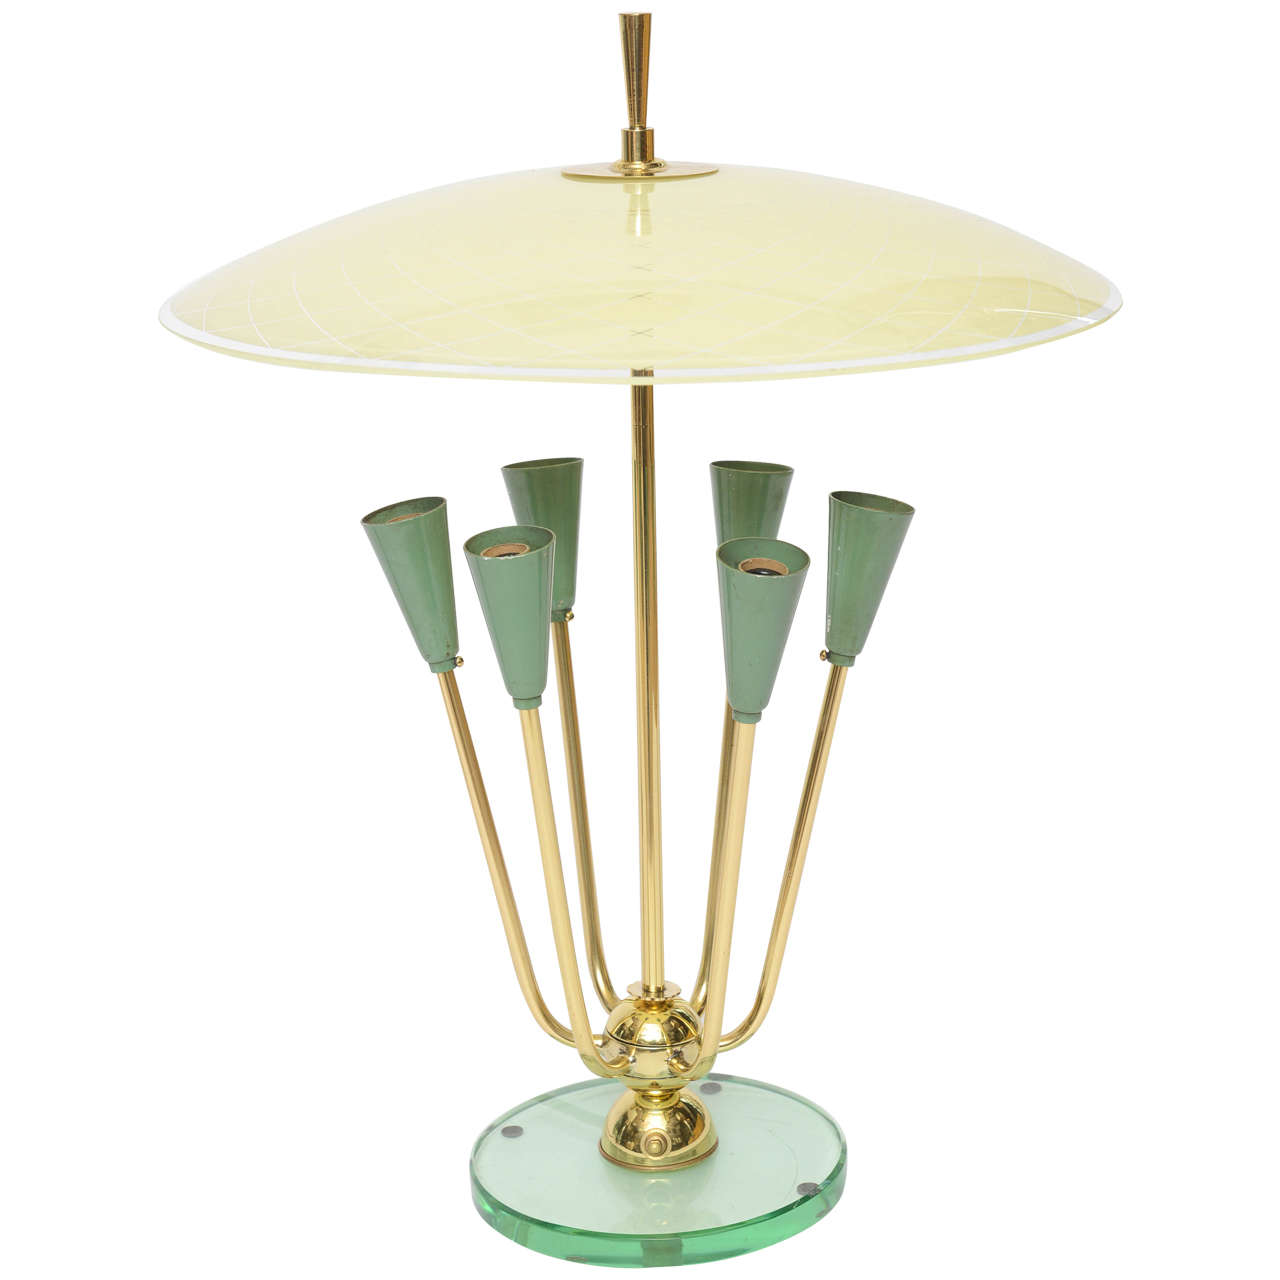 Exceptional Italian Table Lamp in Manner of Fontana Arte